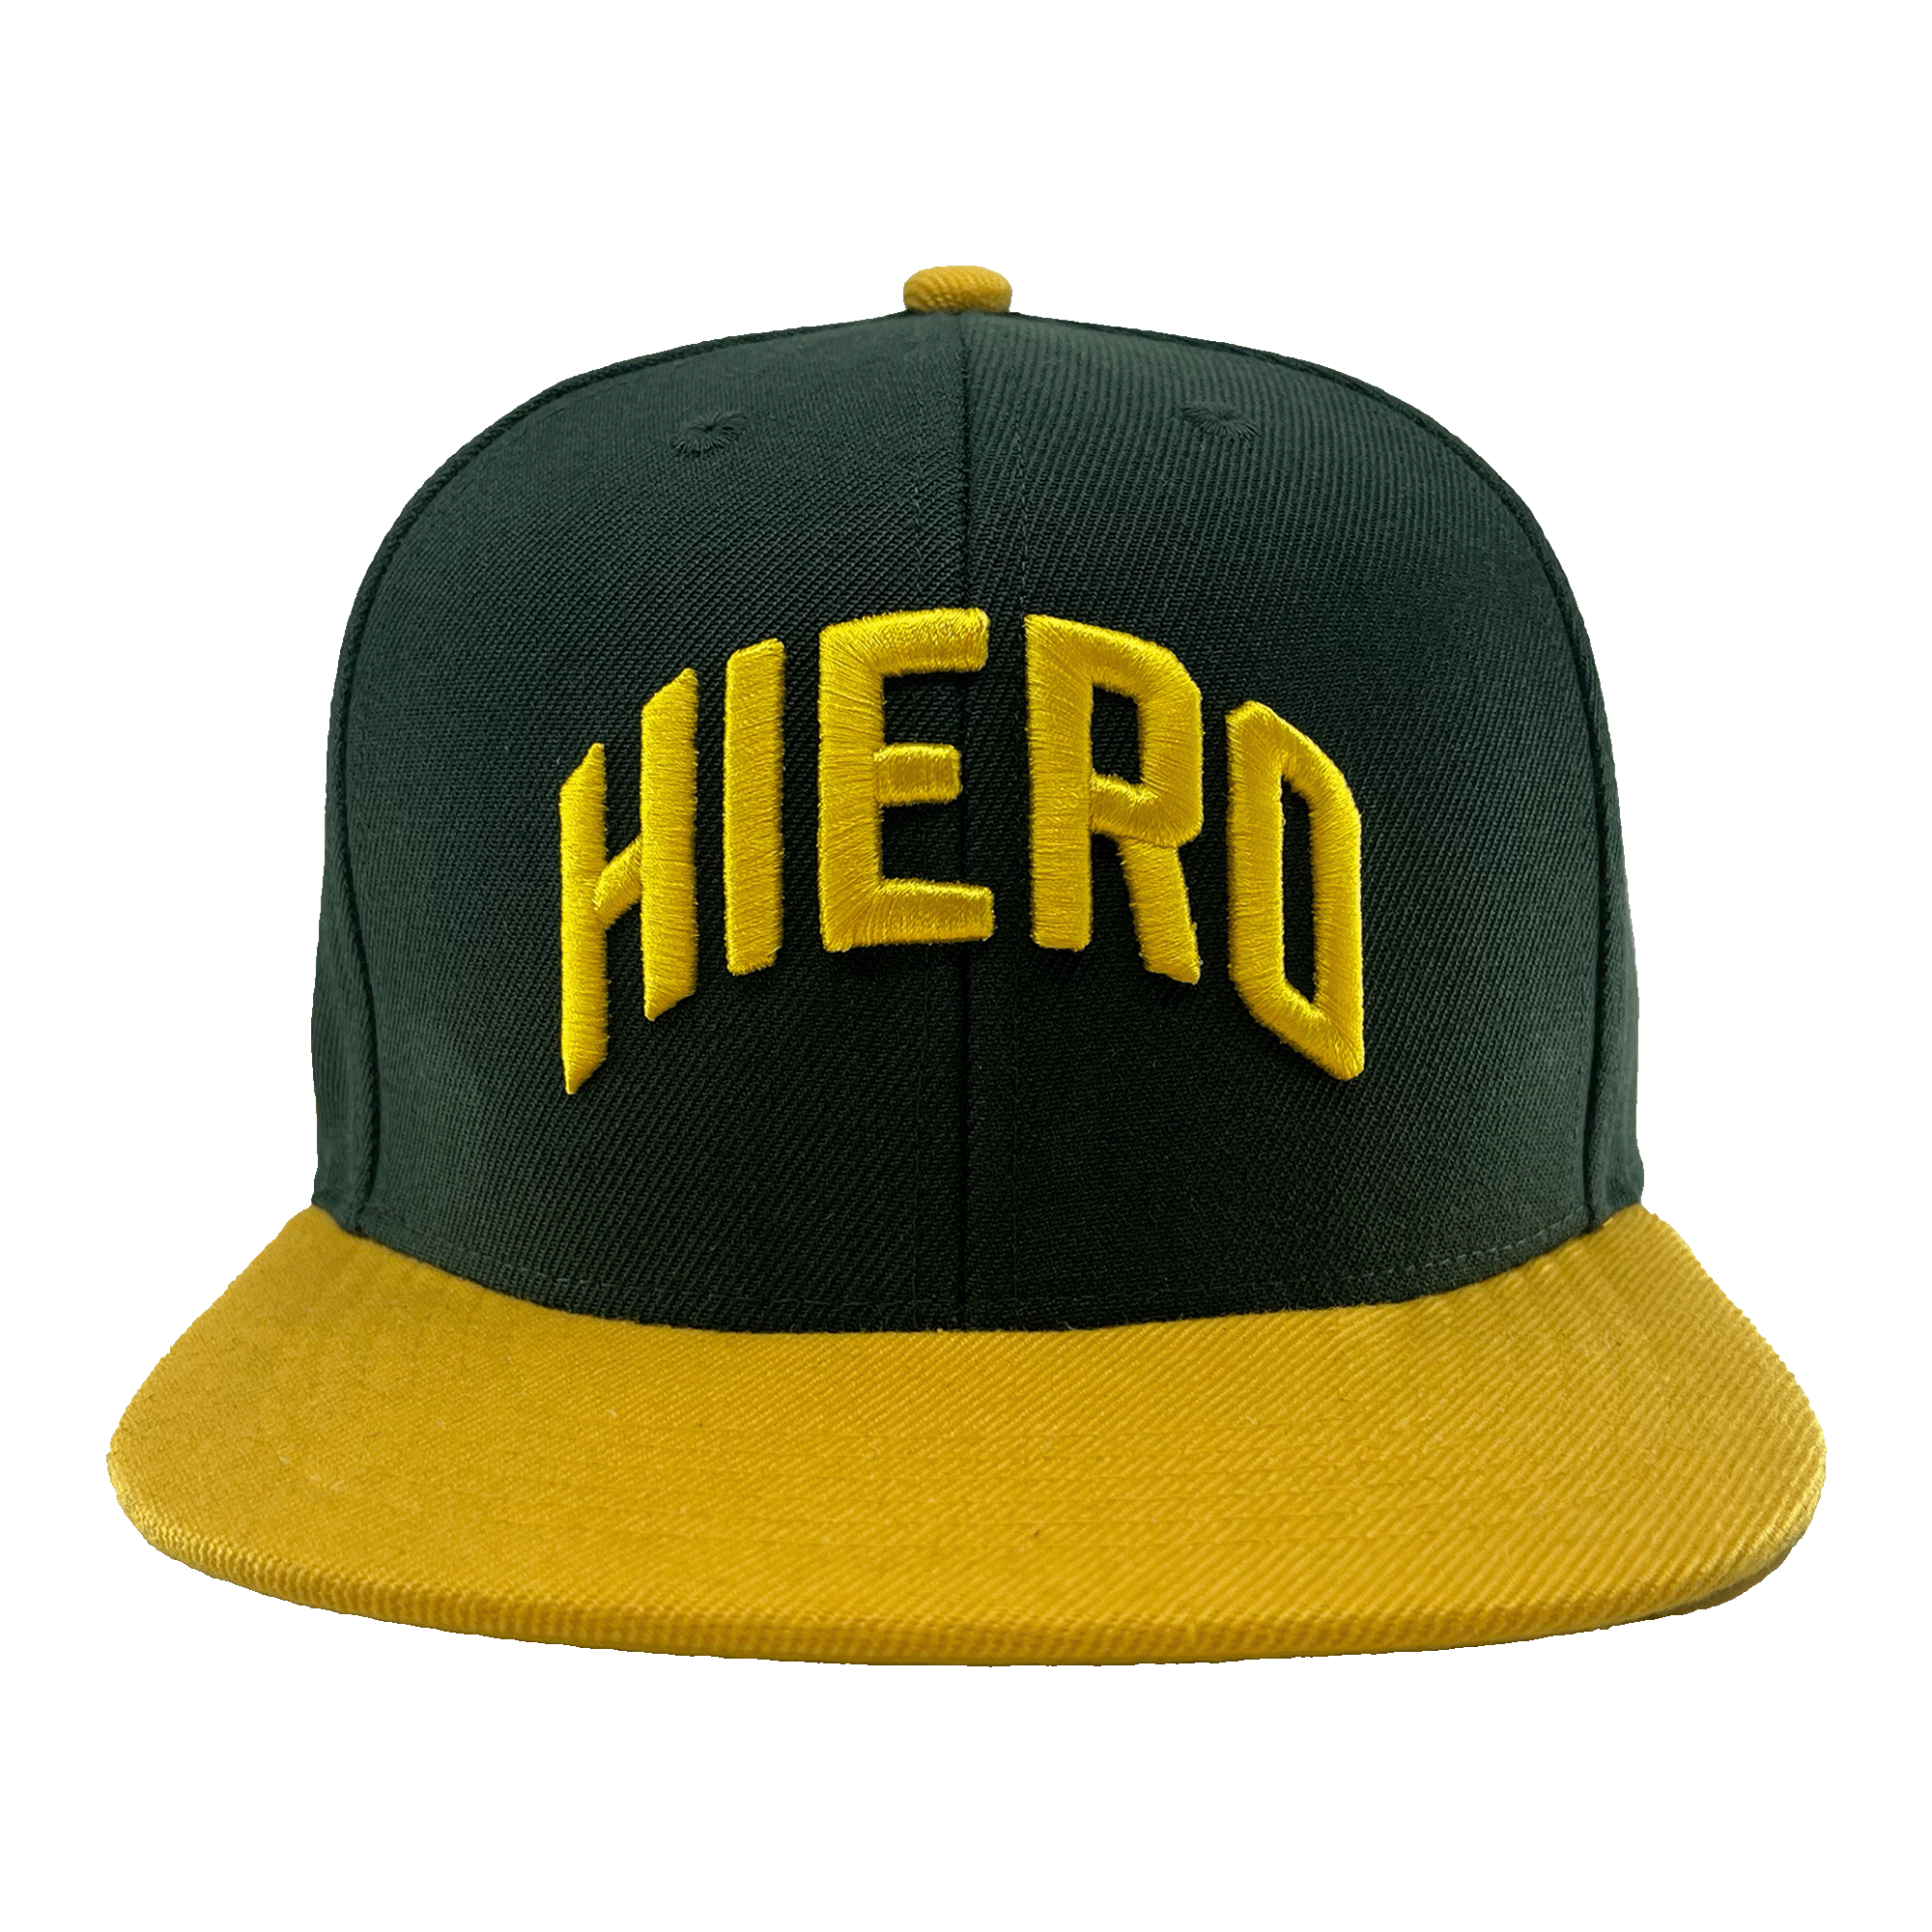 Front view green snapback cap with a yellow flat-billed visor and an embroidered HIERO wordmark on the crown.